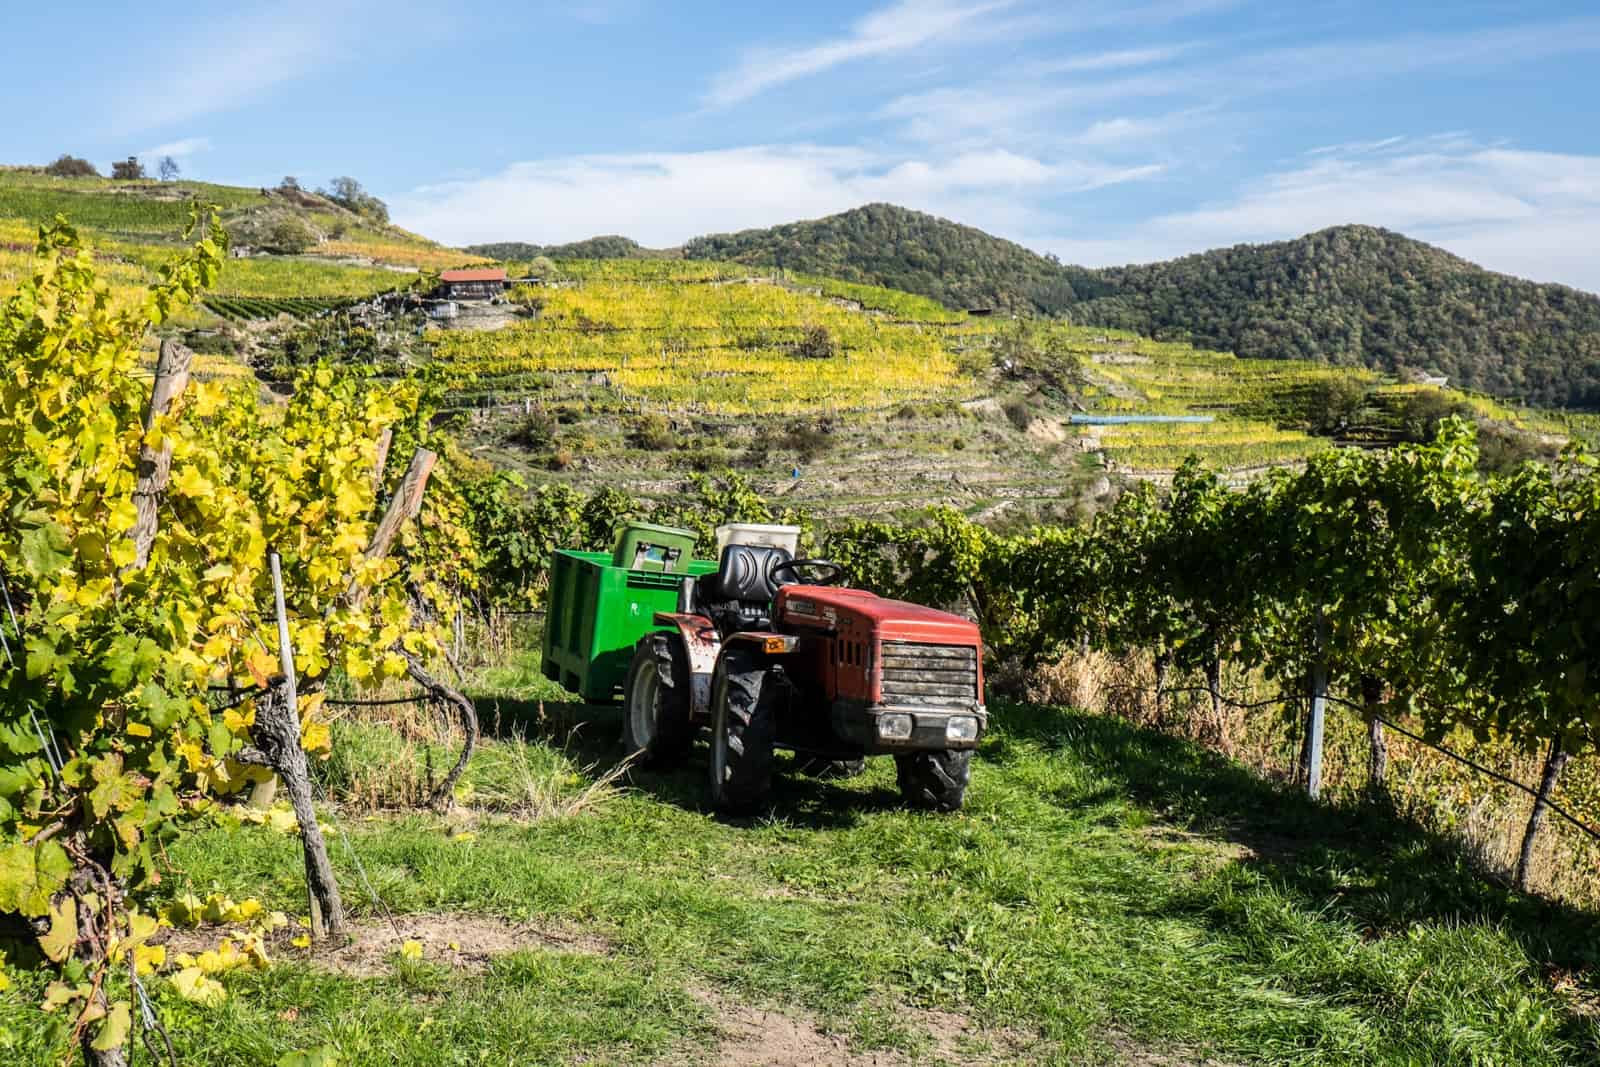 A small red tractor with a green storage box at the back sits next to a row of yellow vine leaves in a vineyard in Wachau Austria, backed by hills with terraces of other vineyards